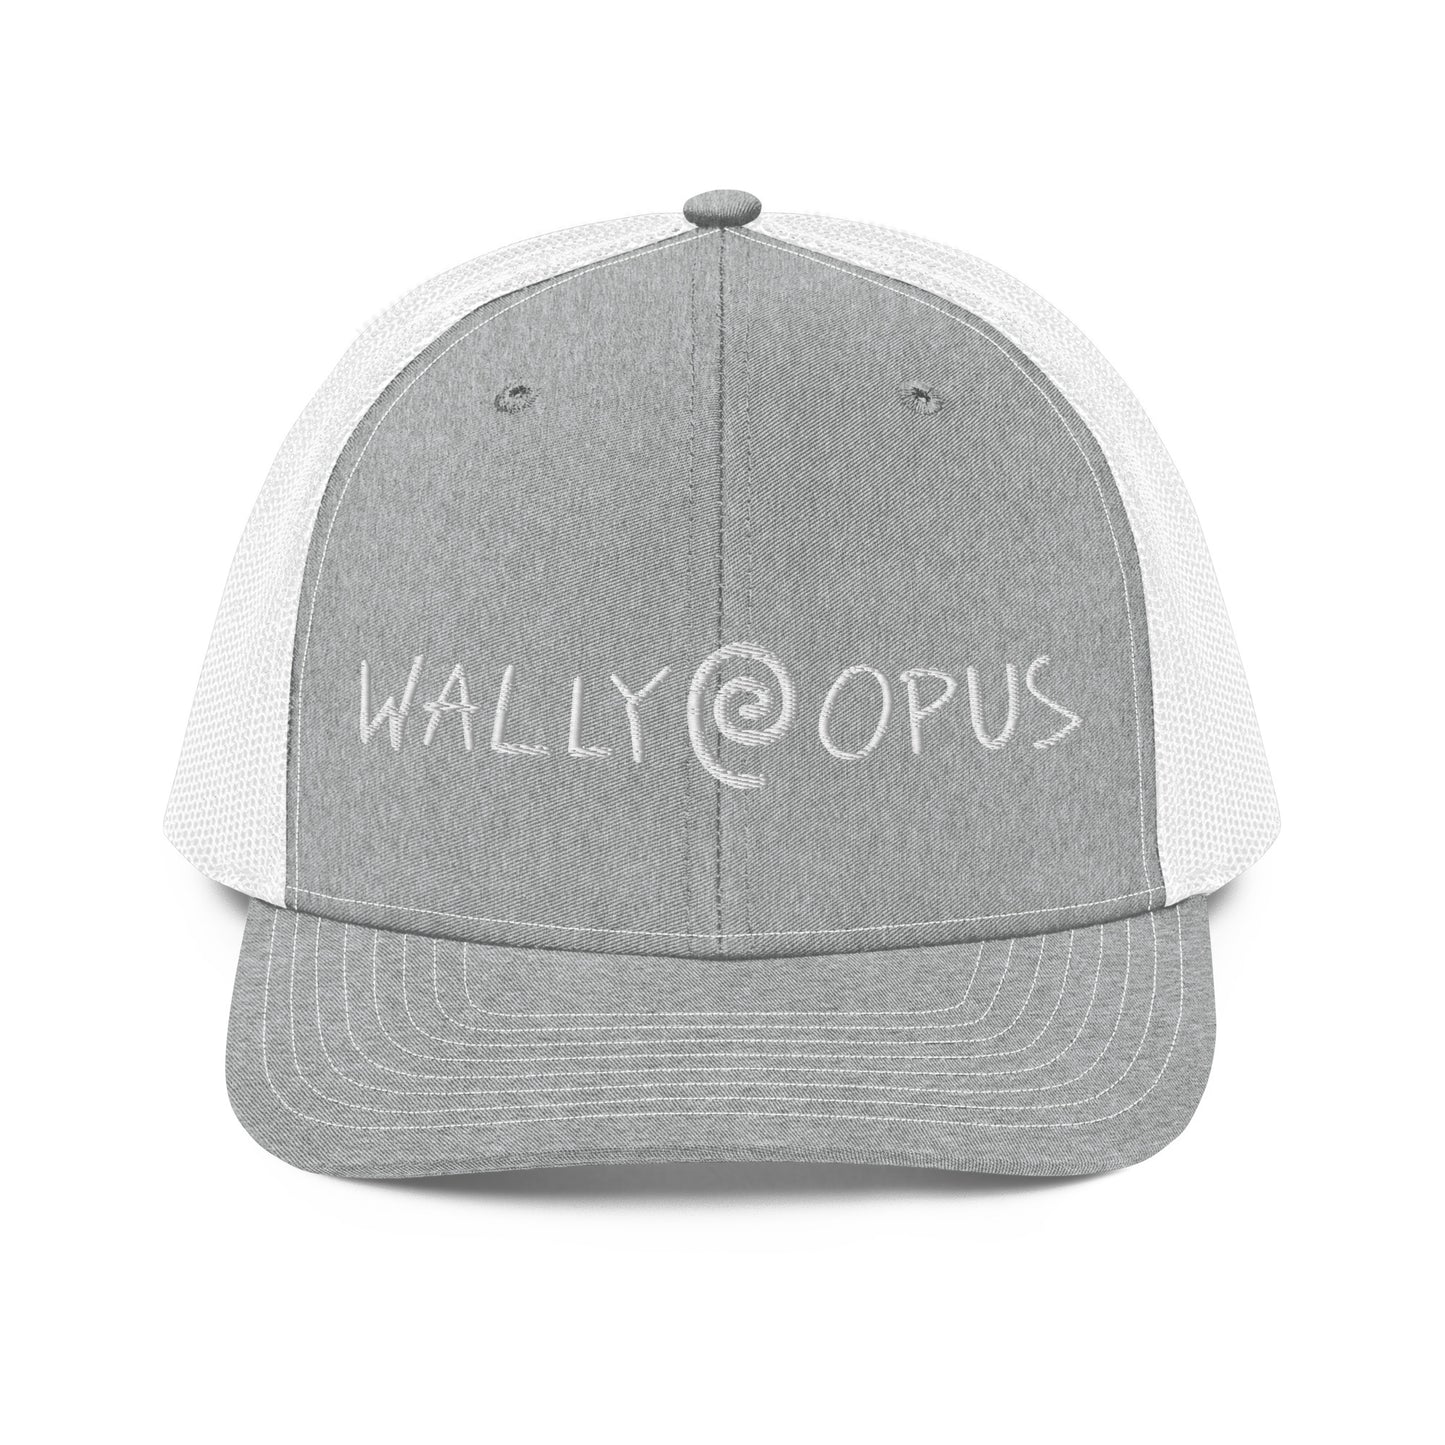 Wally Pitstop Cap